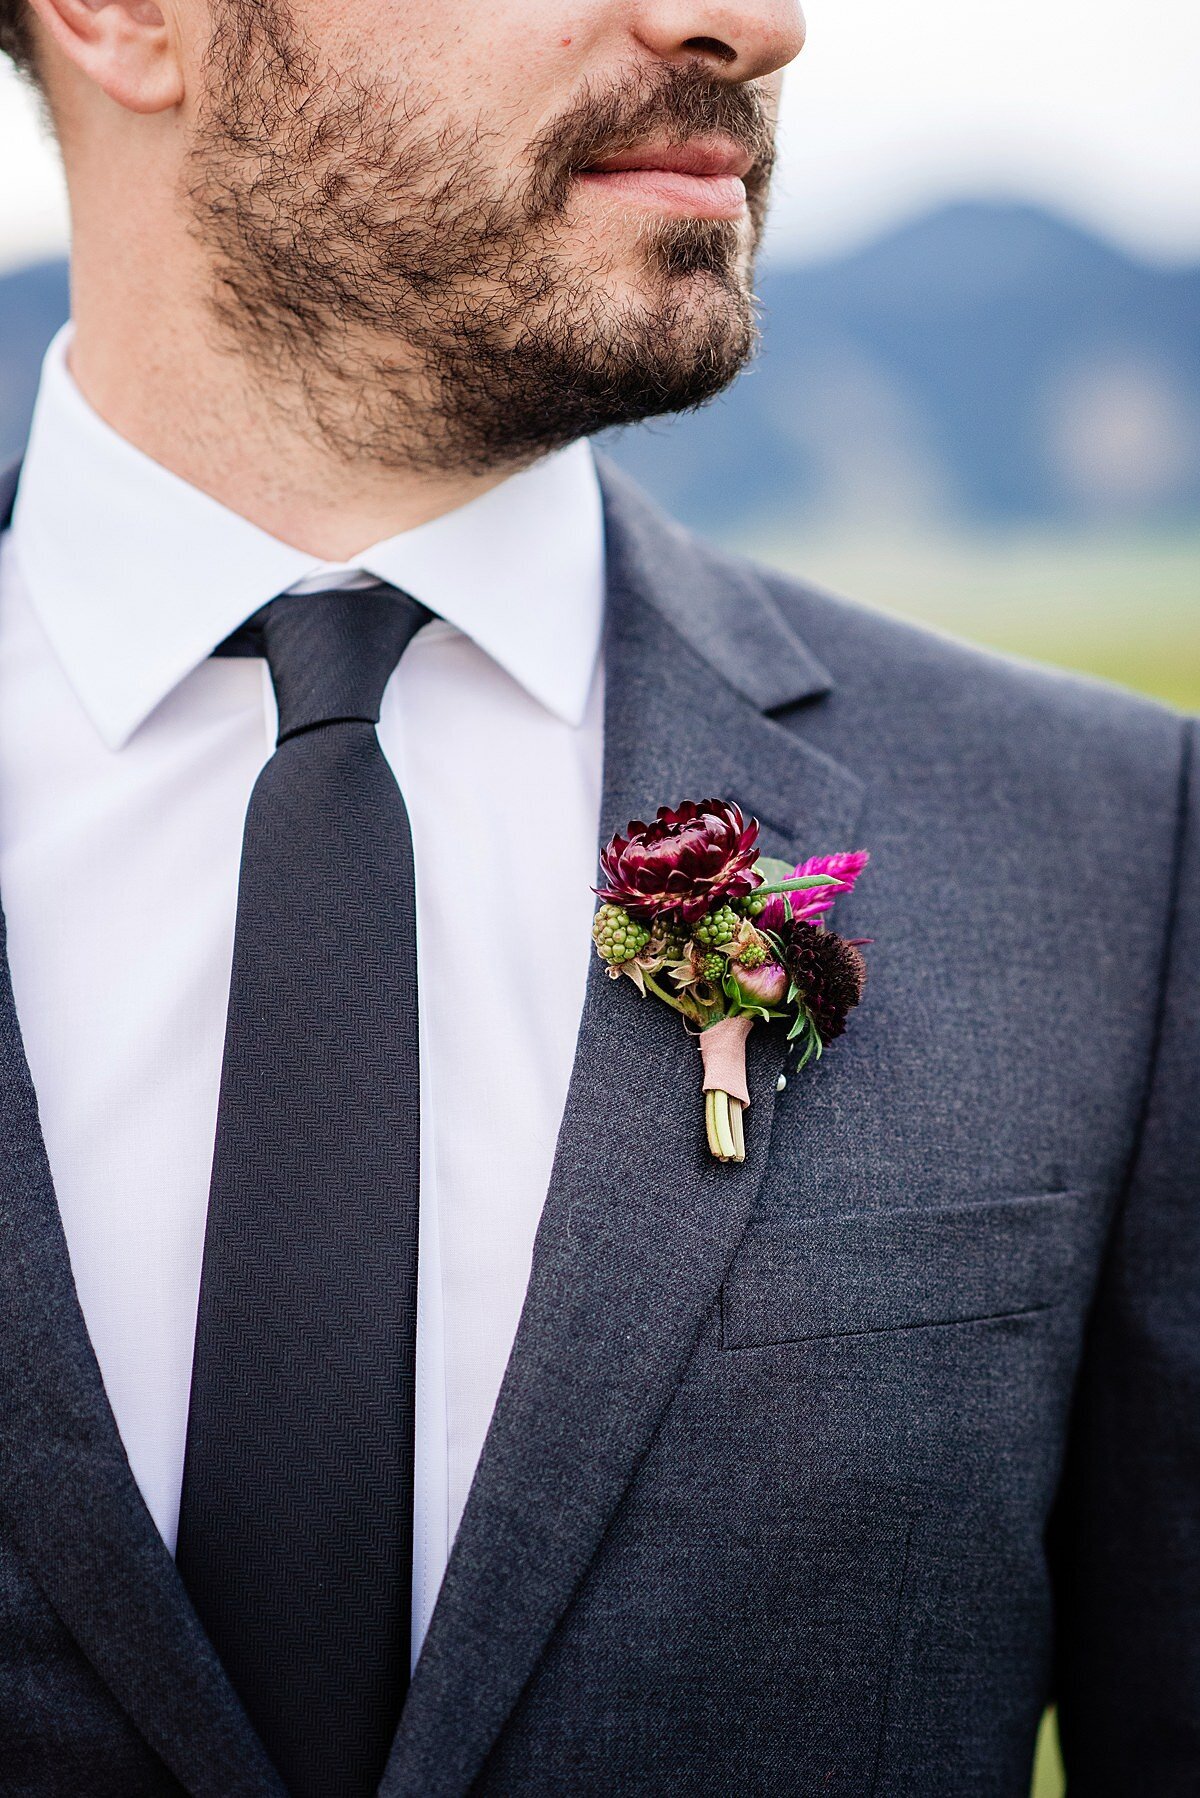 Detail of the groom's boutonniere. The boutonniere is burgundy and pink flowers wrapped in a pink ribbon. The groom is wearing a charcoal jacket with a white shirt and a black tie.